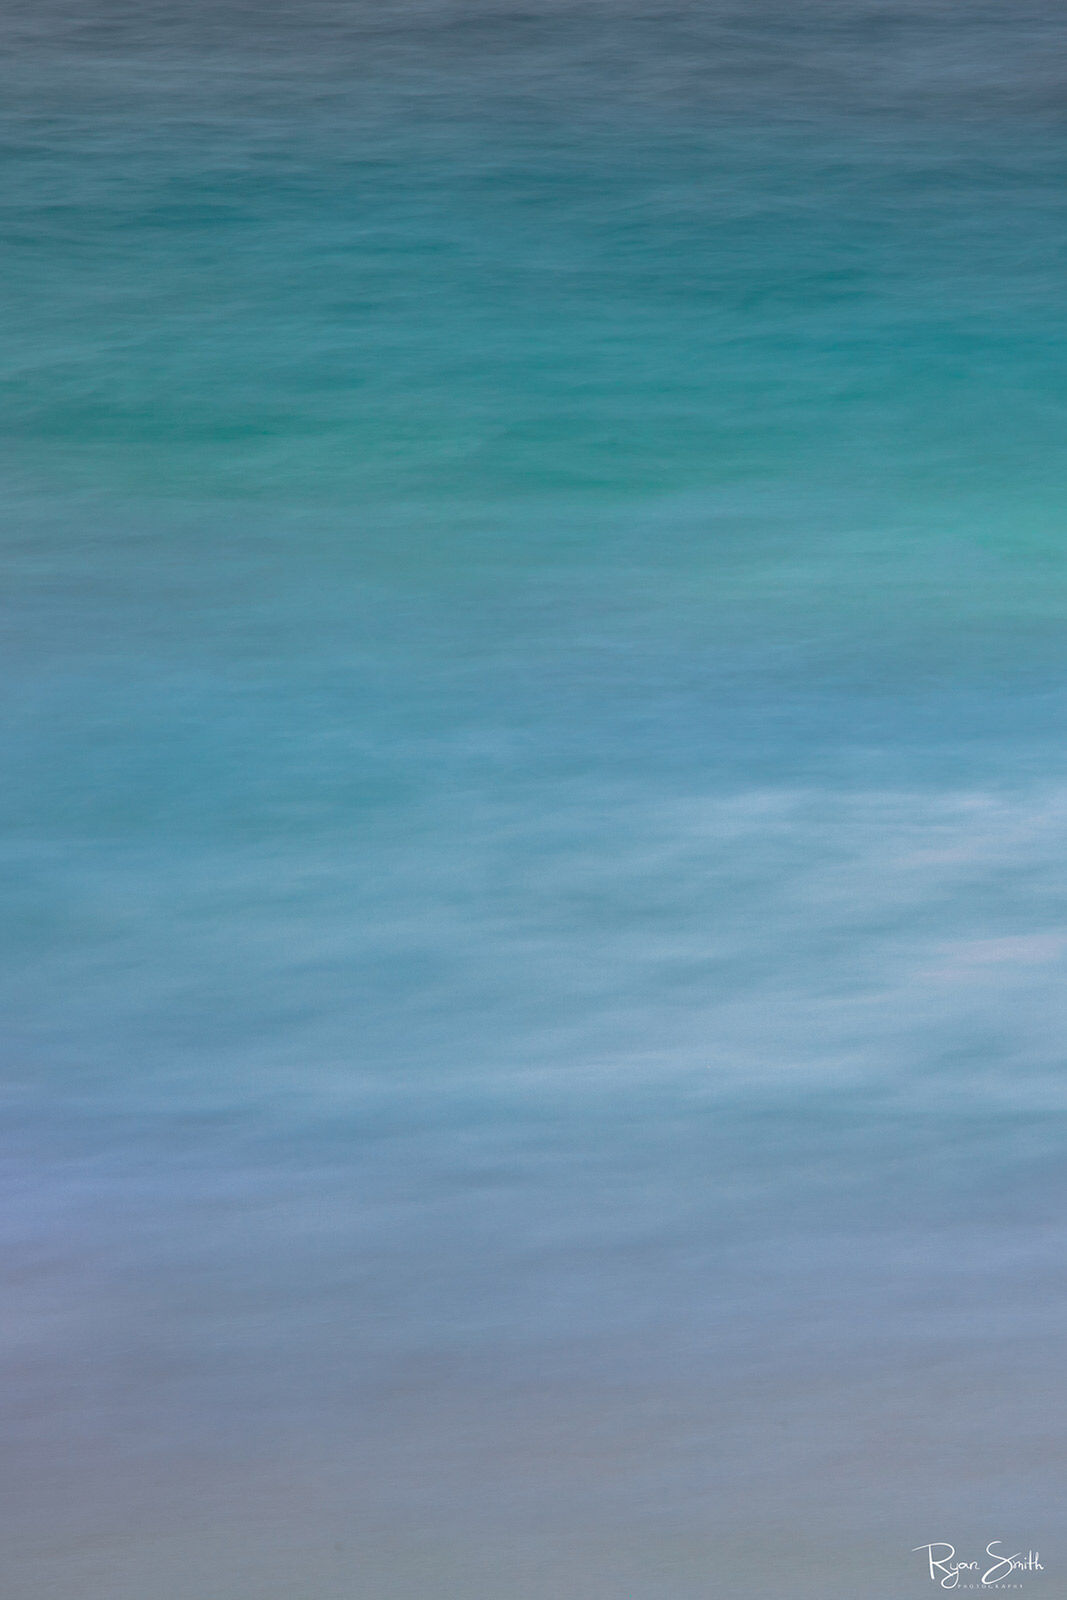 Vertical abstract photography of the Hawaiian waters close up shows the many gorgeous shades of turquoise, blue, white and tan that all come togethers seamlessl